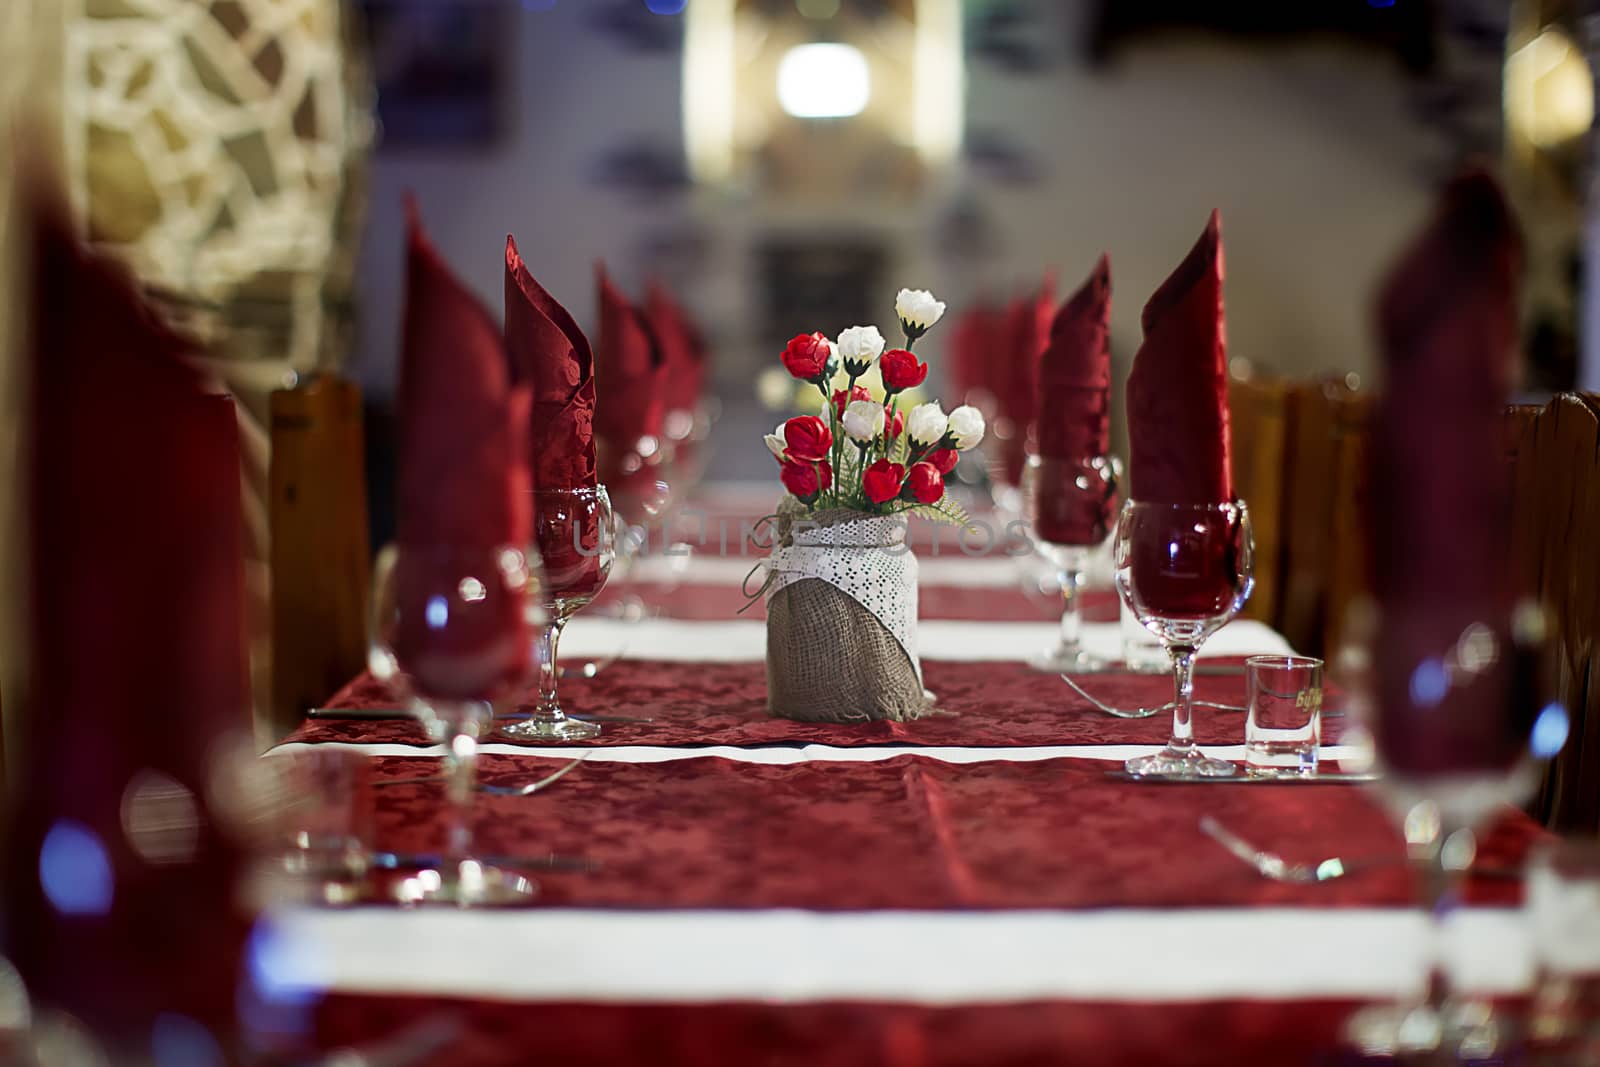 The restaurant .Empty restaurant. Table setting. Prepare for a banquet. Festive table.s a long table served, tablecloths and a bouquet of flowers on the table.